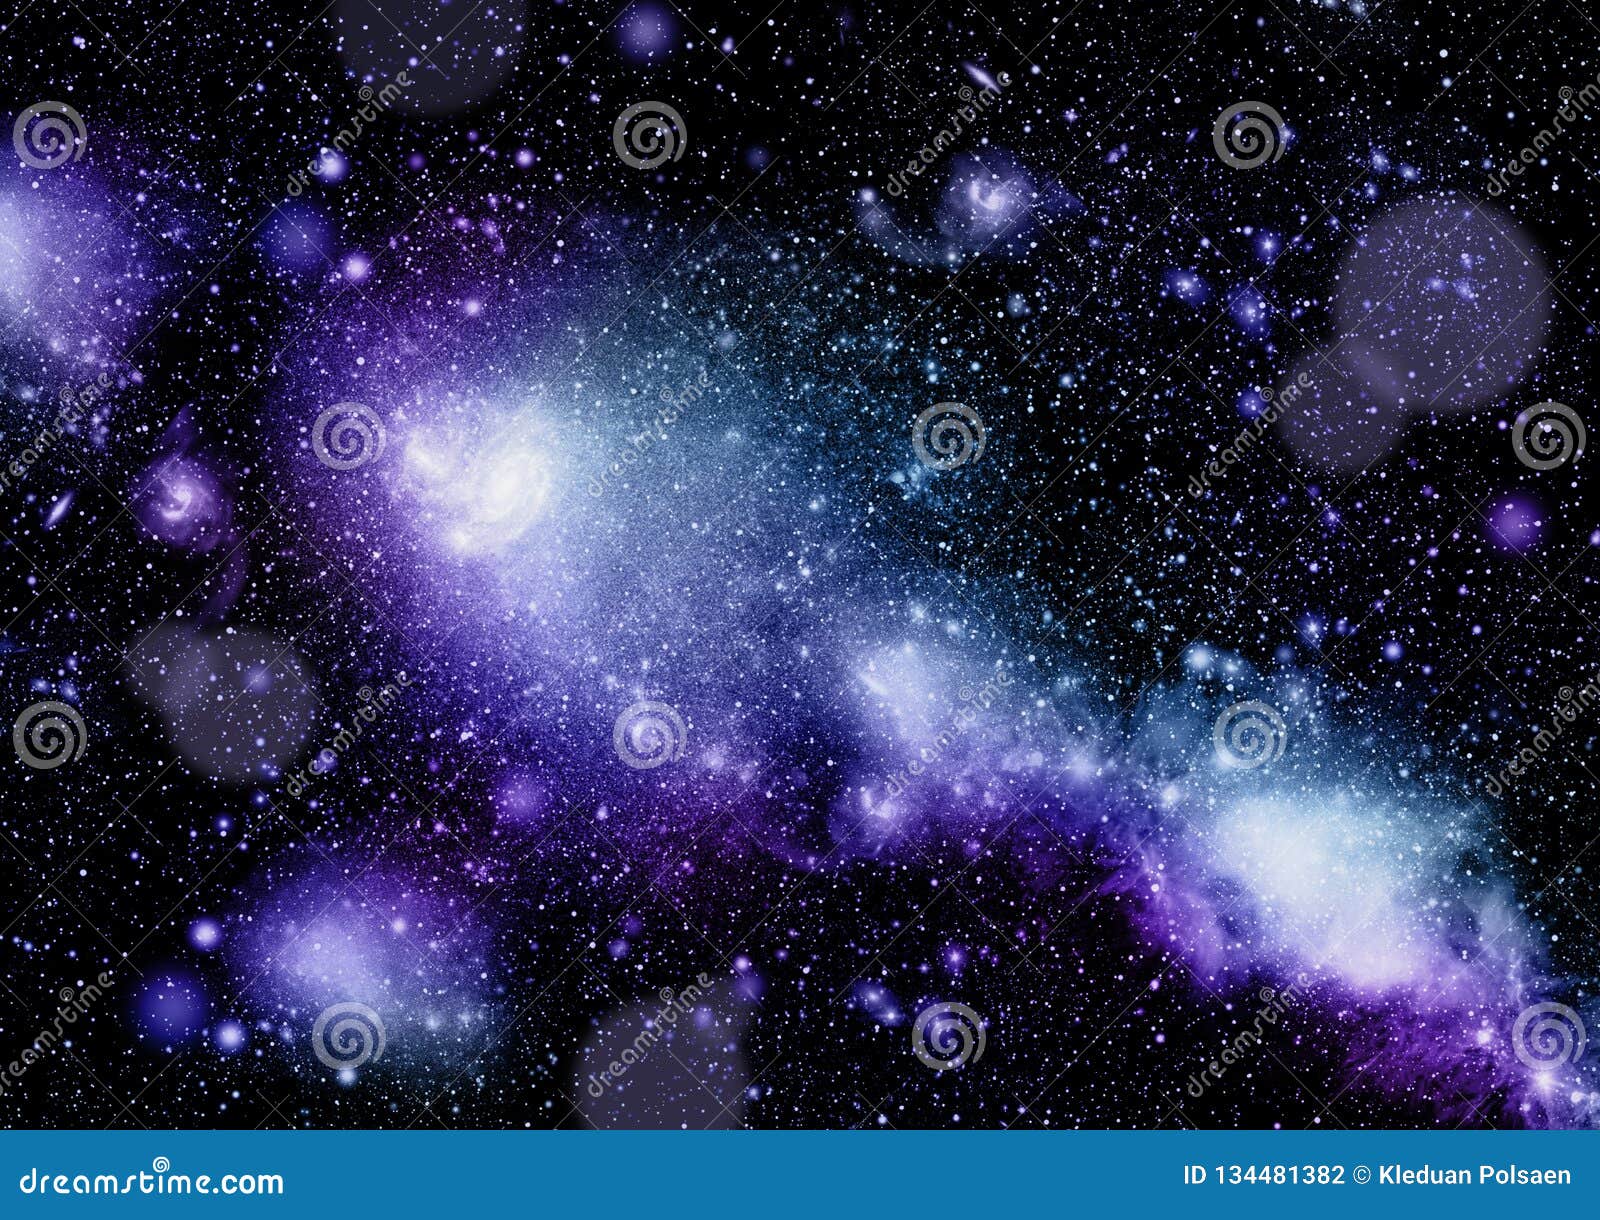 A Space Of The Galaxy Atmosphere With Stars At Dark Background Stock Illustration Illustration Of Color Design 134481382